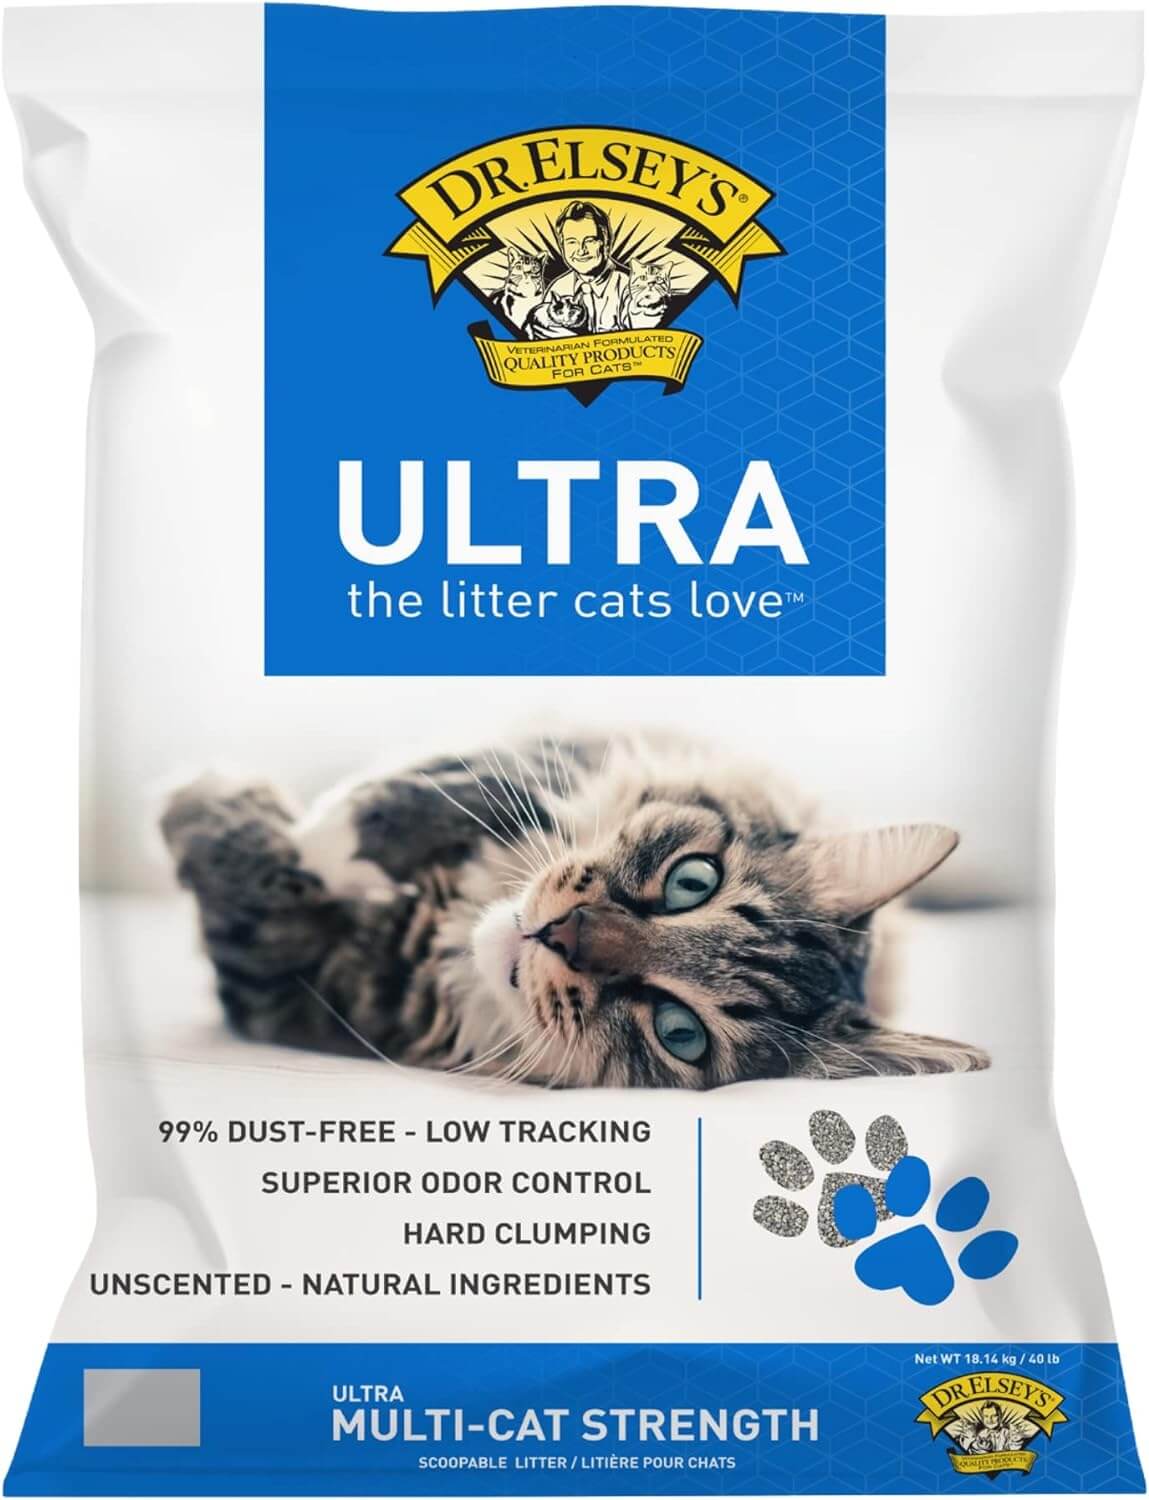 Dr Elsey's Precious Cat Ultra Unscented Clay Litter